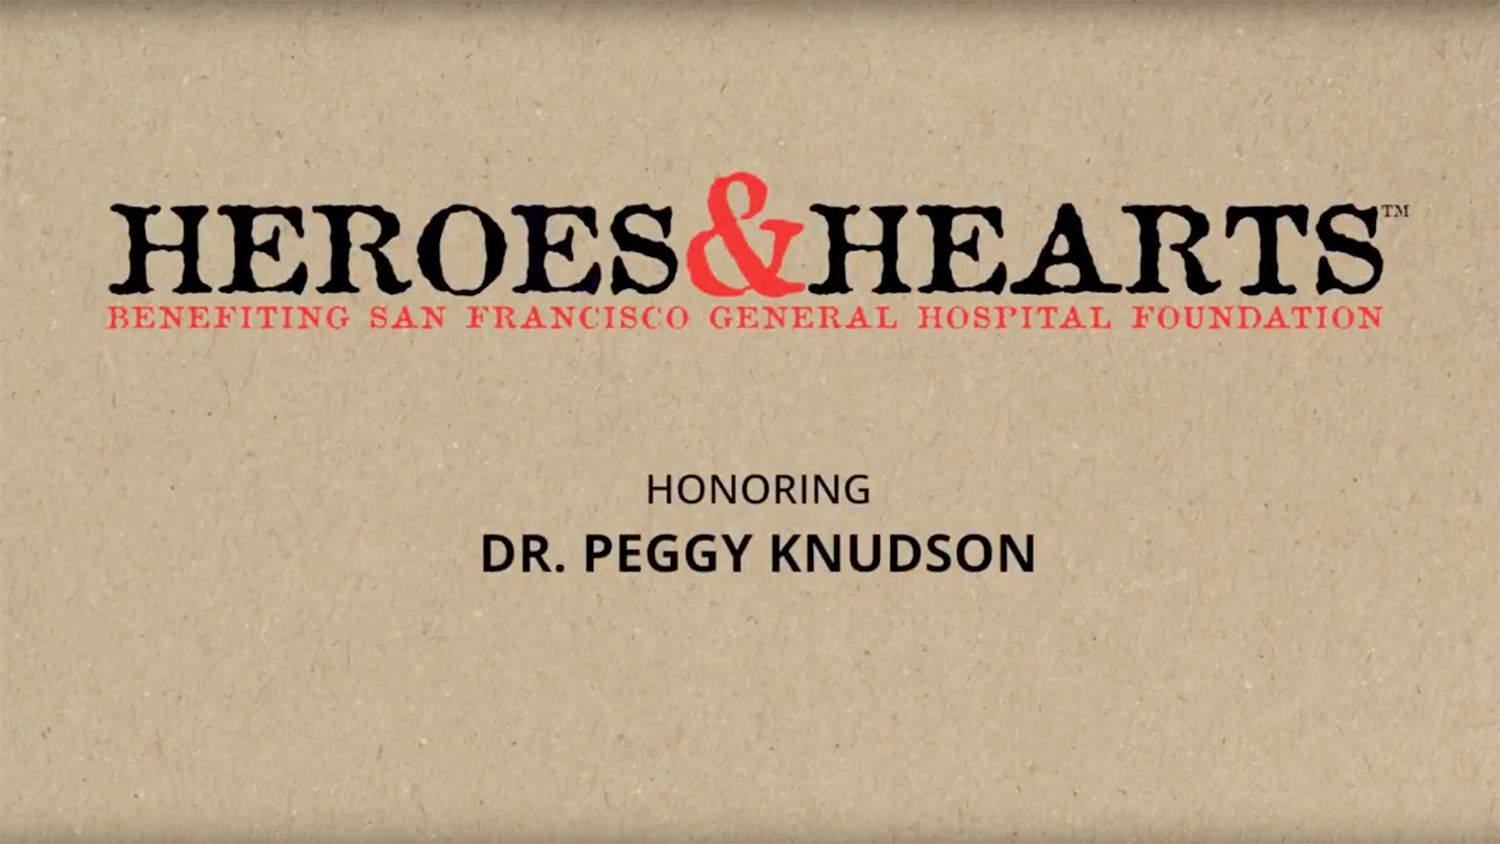 "Heroes & Hearts" benefiting San Francisco General Hospital Foundation. Honoring Dr. Peggy Knudson.